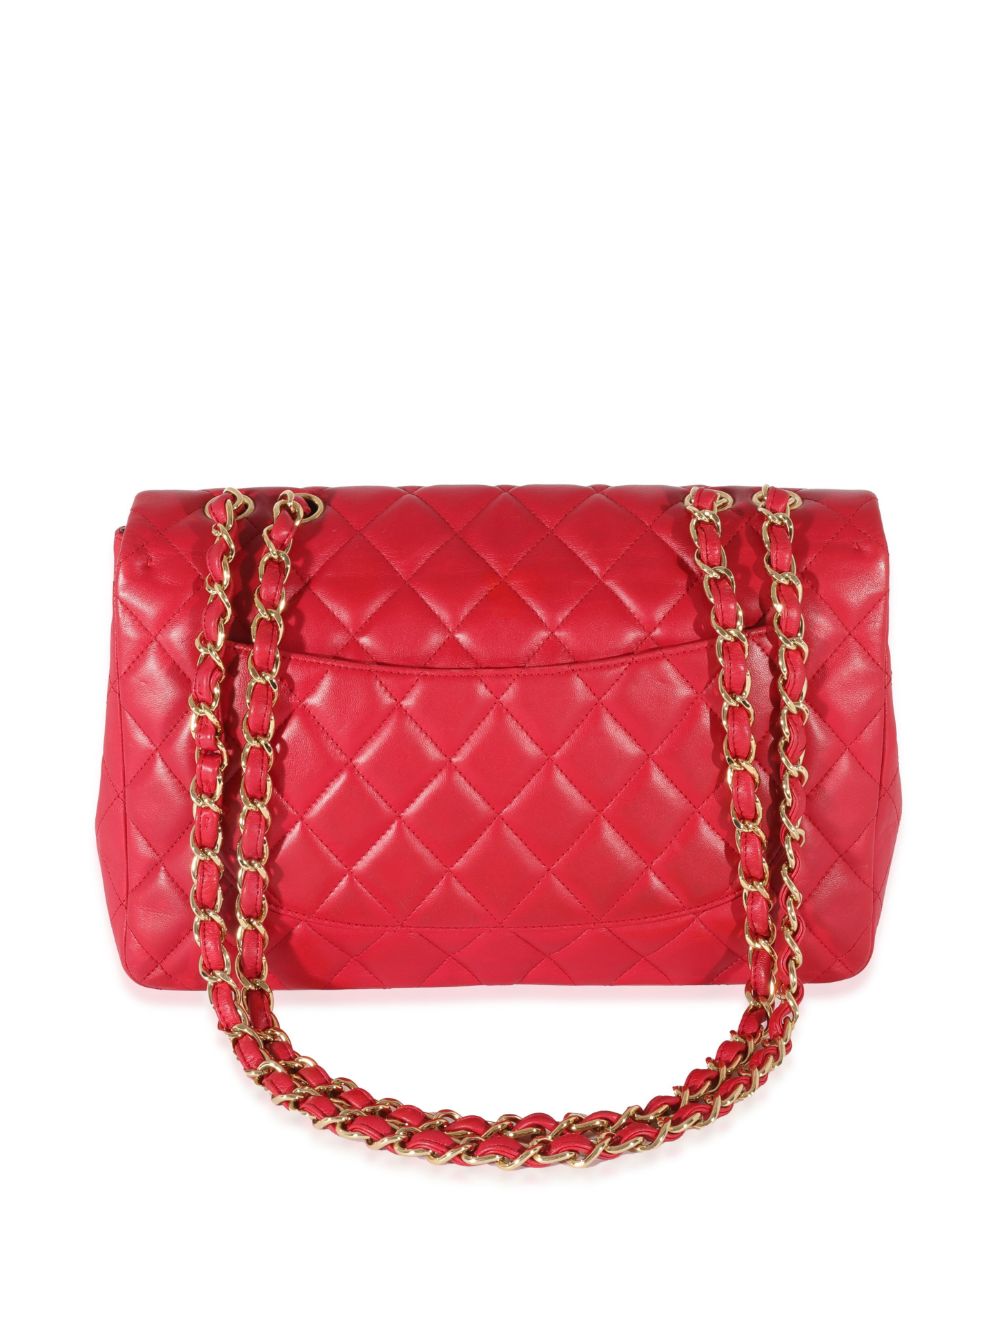 Pre-owned Chanel Jumbo Classic Flap 单肩包（2008-2009年典藏款） In Pink